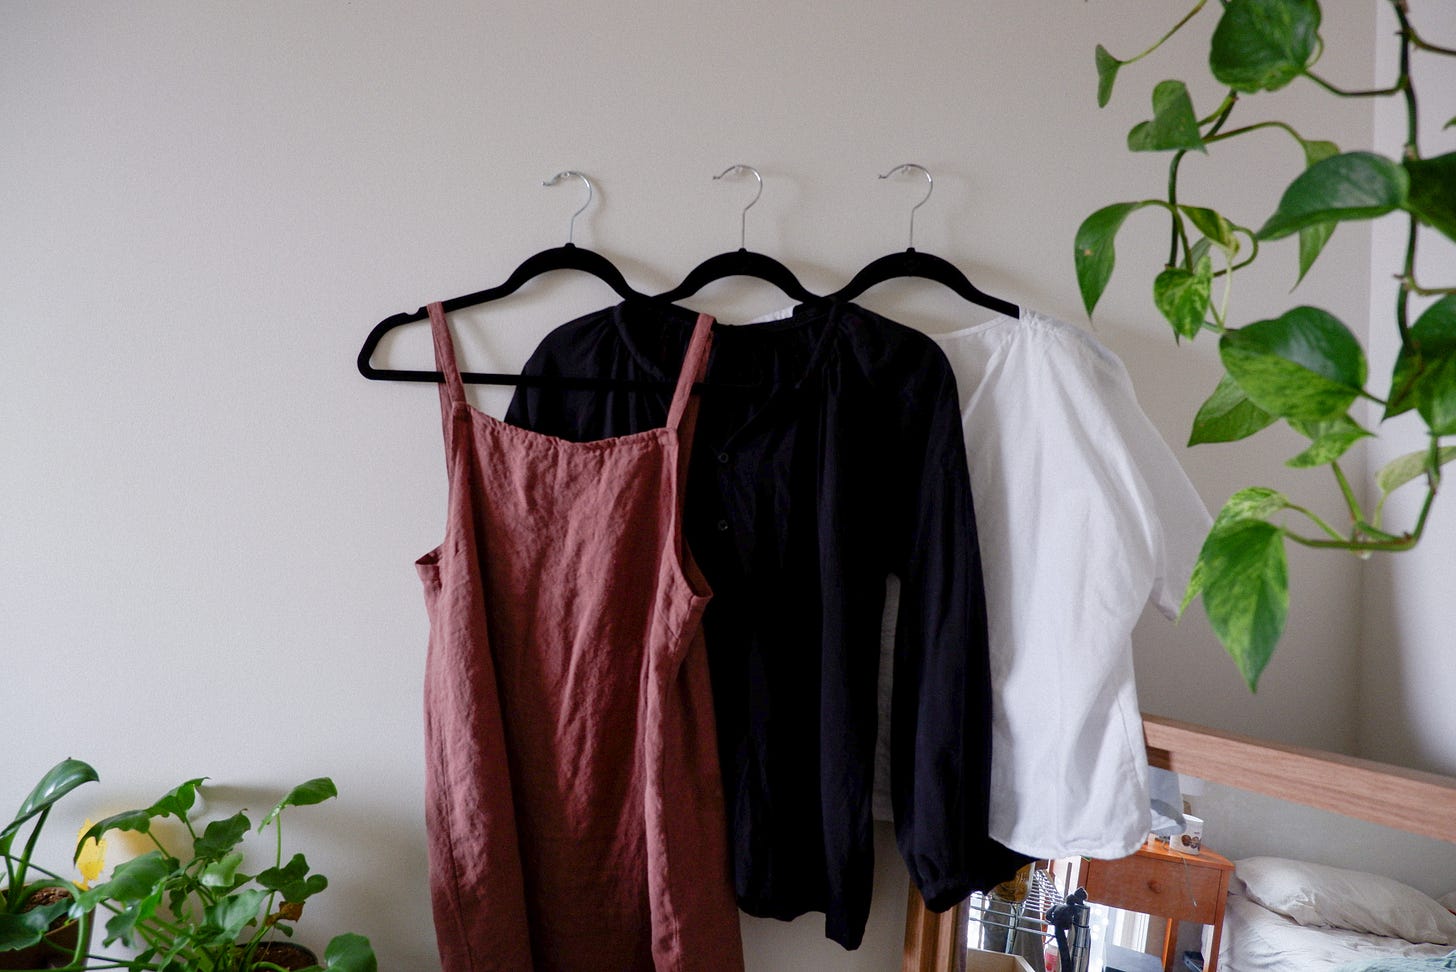 a pink dress, black blouse, and white blouse hang on hangers in front of a beige wall. a vine is hanging in the foreground on the right, with a small plant in the bottom left corner